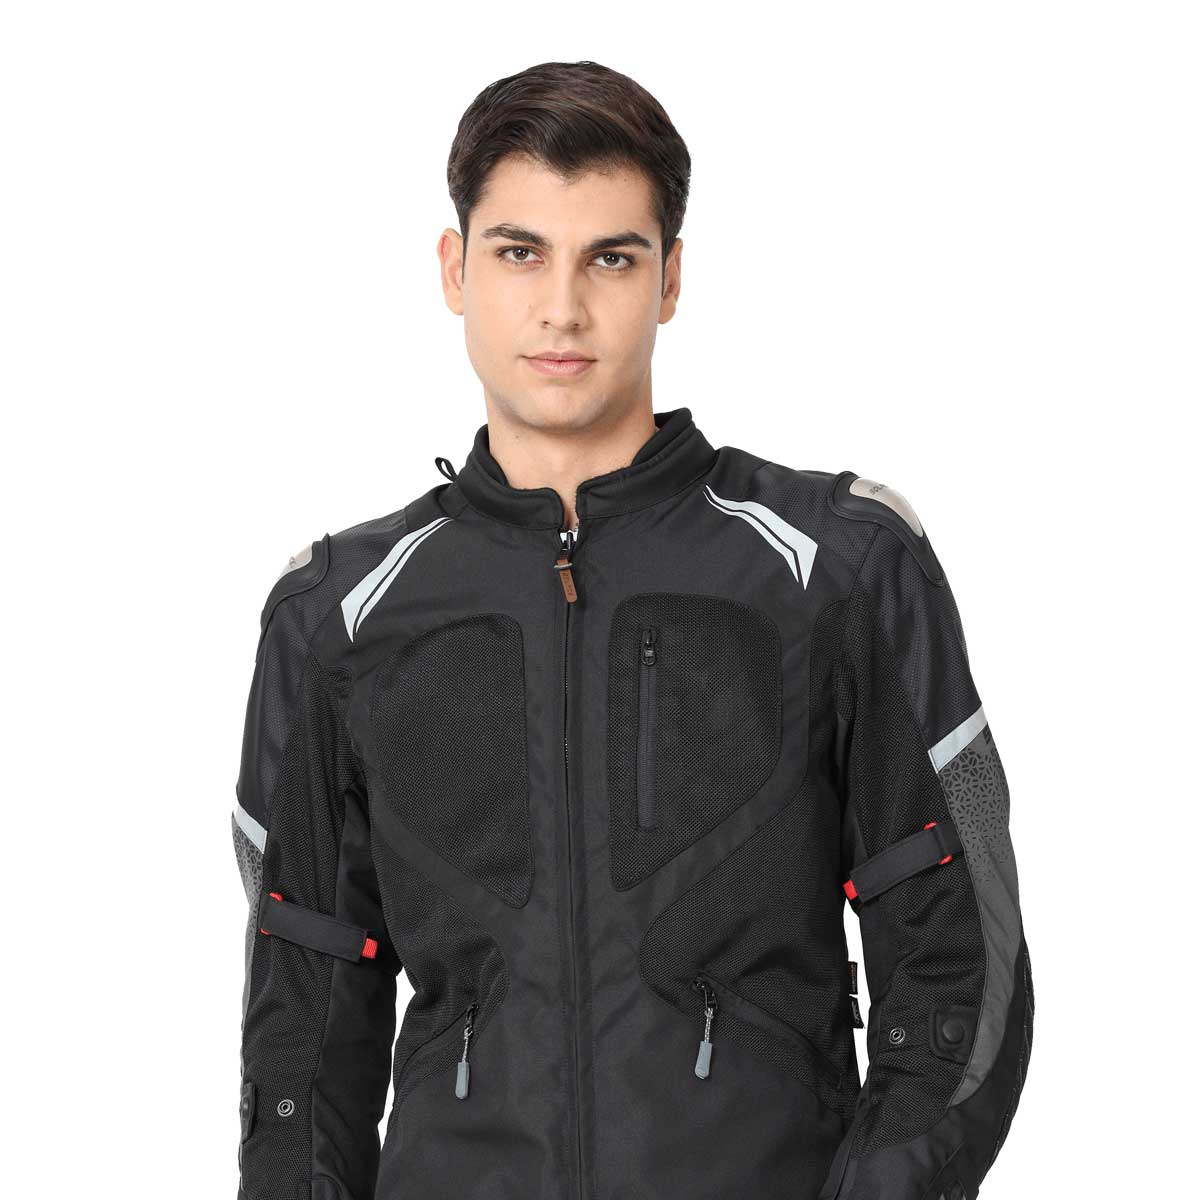 Textile Jackets Manufacturers in Surrey